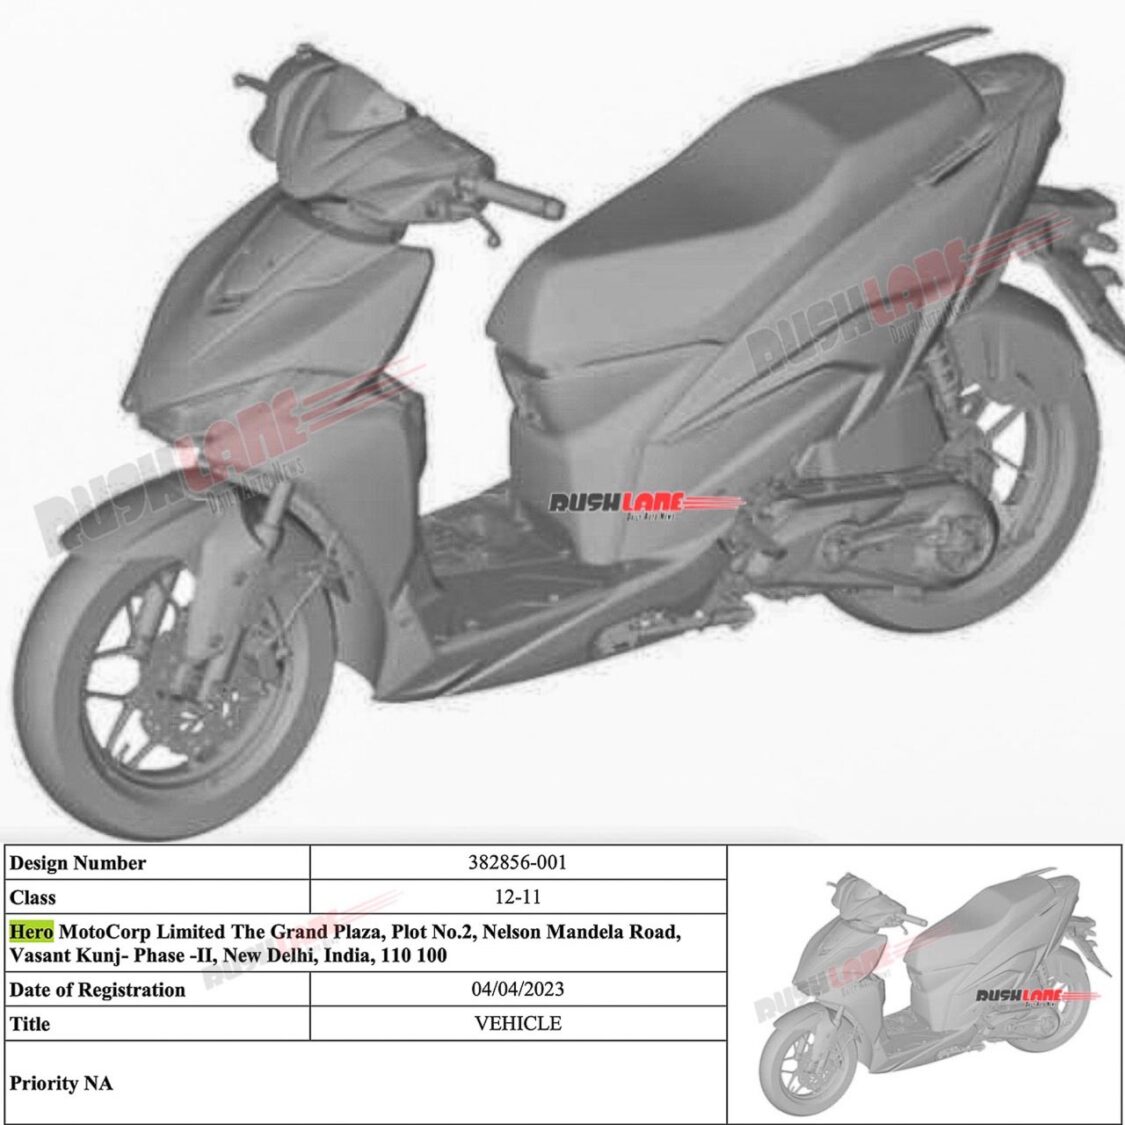 New Hero Xude scooter design patent leaks